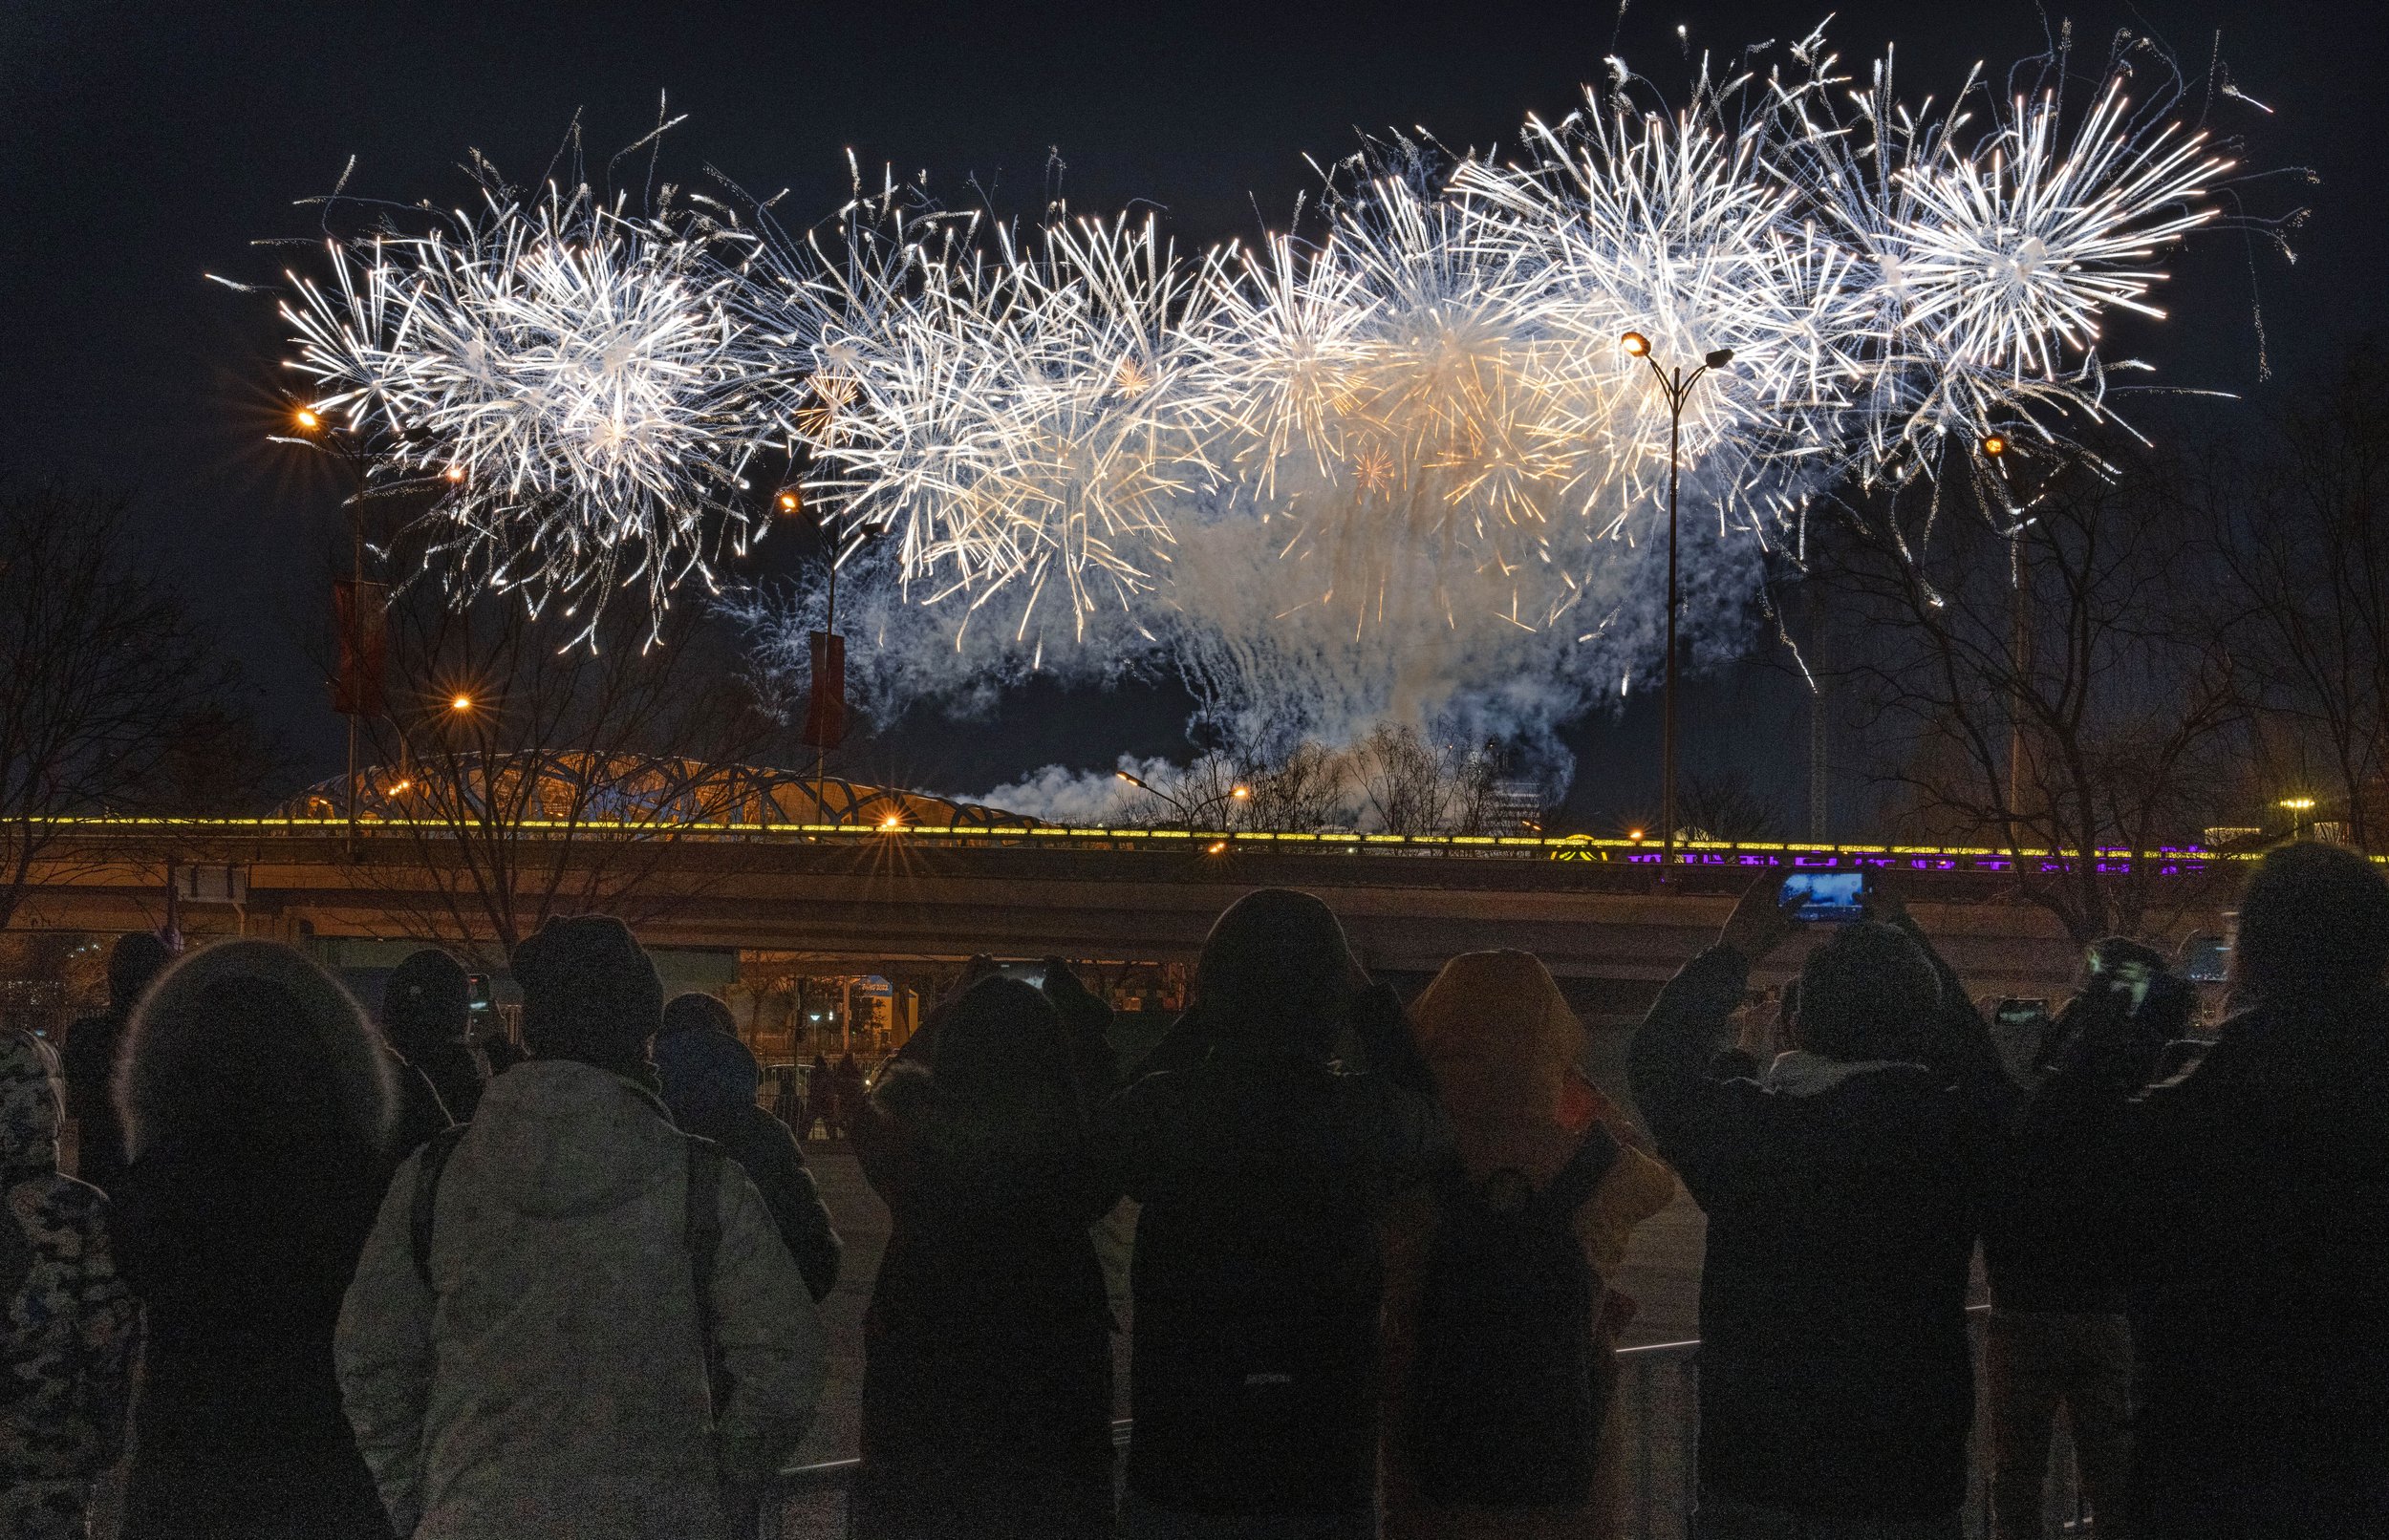  A crowd watches as fireworks explode at the opening ceremony of the 2022 Winter Olympics, Friday, Feb. 4, 2022, in Beijing. (AP Photo/Ng Han Guan) 